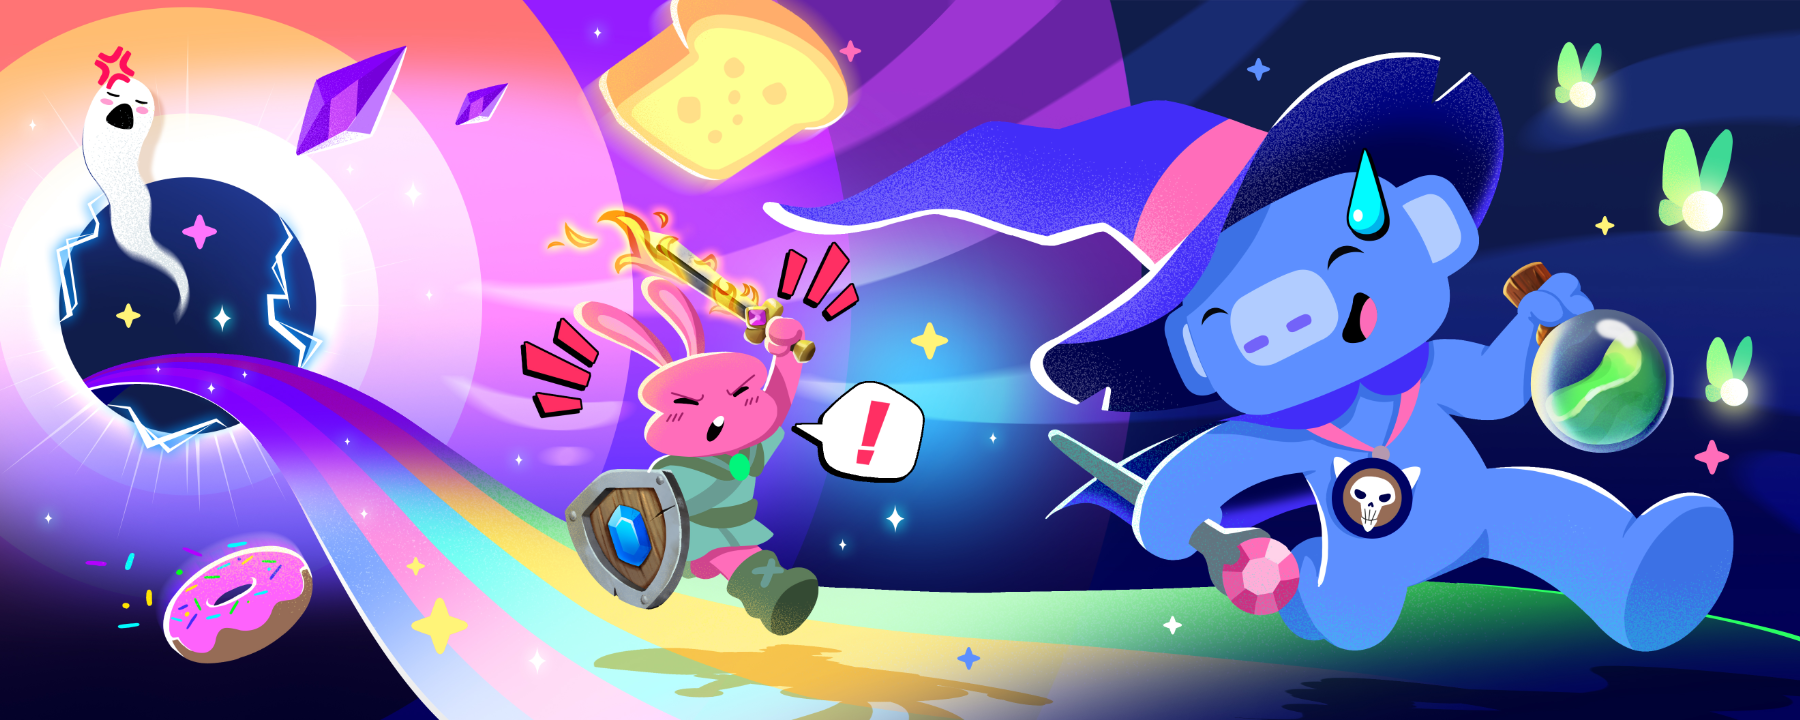 Wumpus running away from Mallow over a rainbow bridge. Wumpus looks like they’ve gotten into a bit of trouble, and Mallow is trying to catch Wumpus. Imagery of ghosts, toast, donuts, potions, and fairies surround the two.